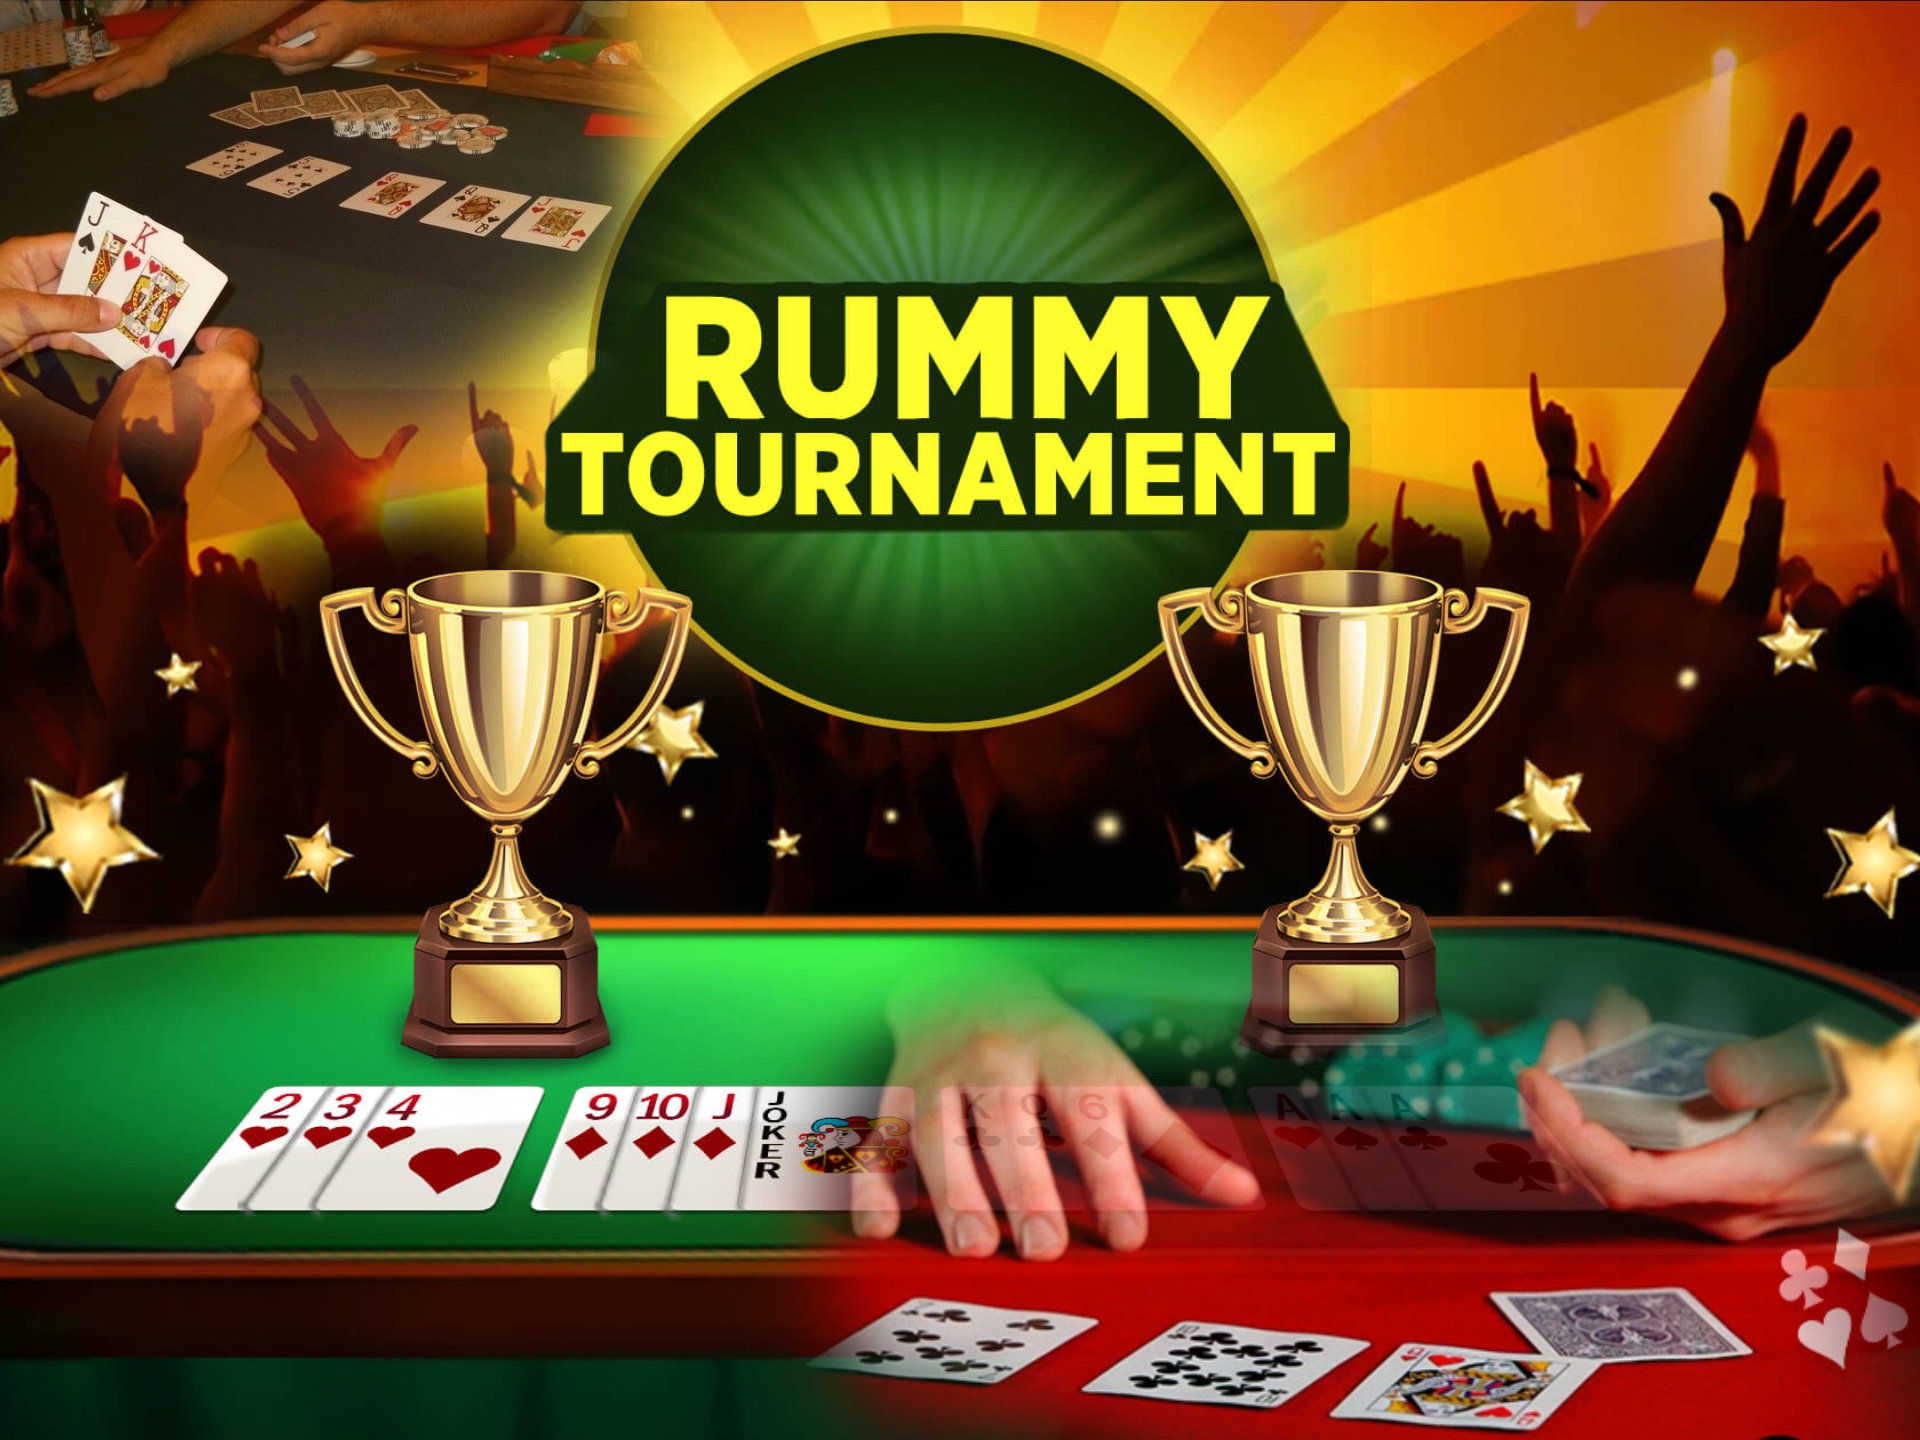 Rummy tournaments is a good option to test your skill and earn big prizes